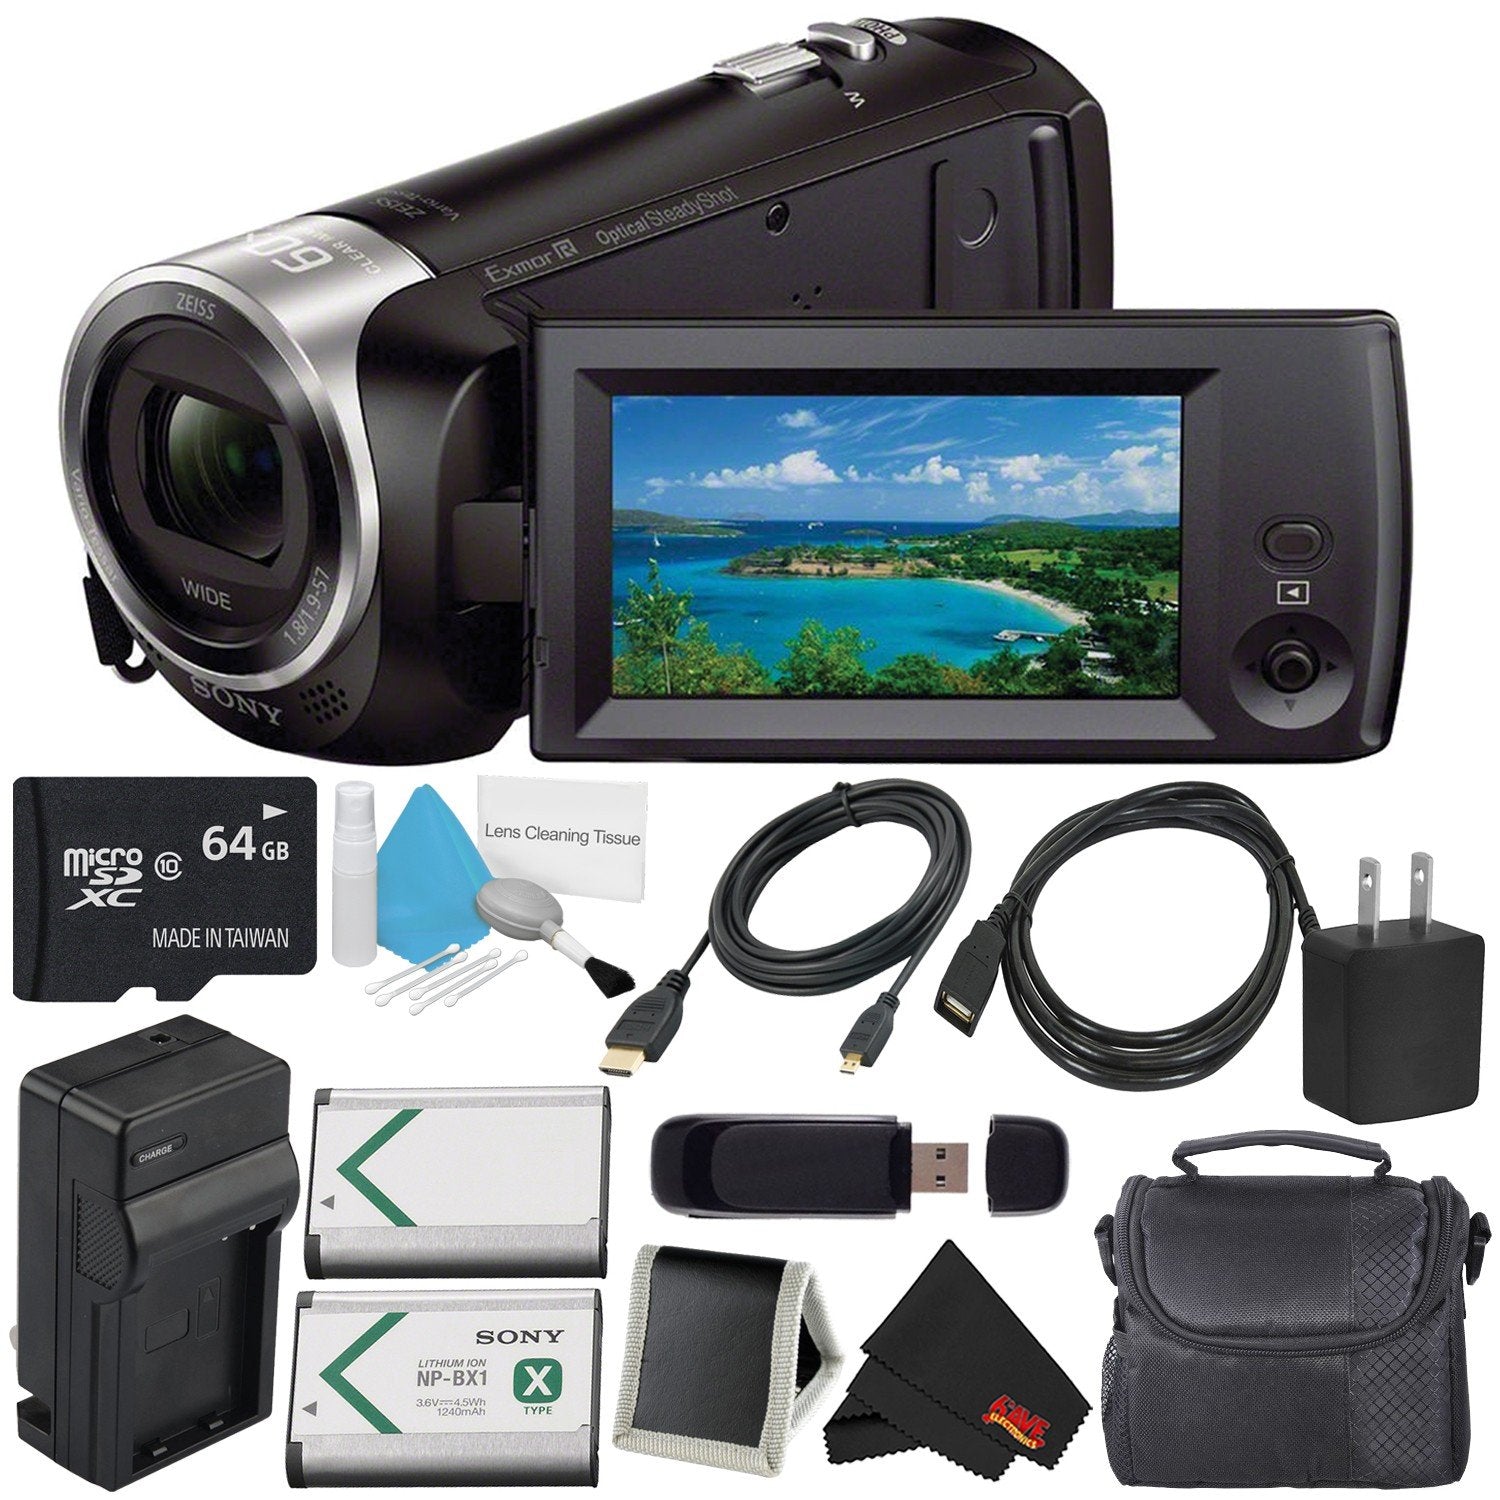 Sony HDR-CX405 HD Handycam HDRCX405/B + 64GB microSDXC + Carrying Case + Deluxe Cleaning Kit Bundle